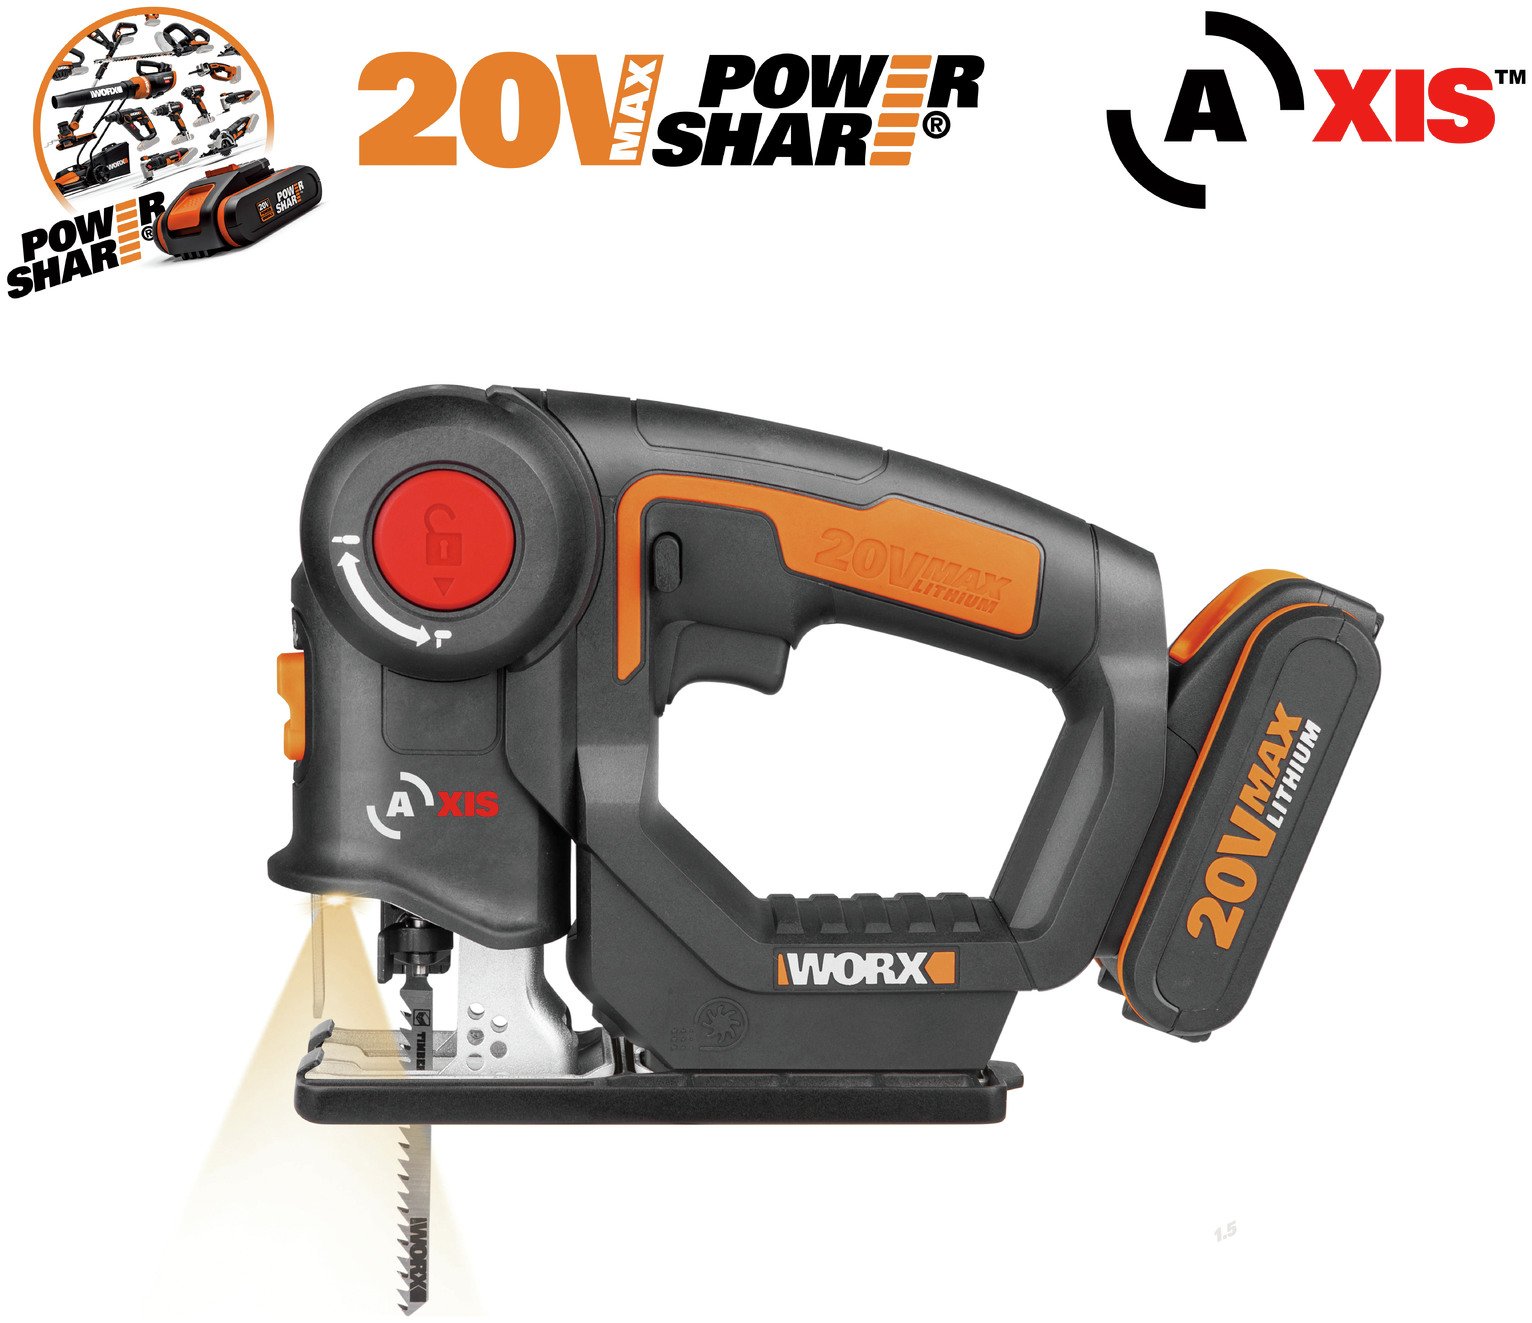 WORX WX55018V 20V MAX AXIS Multi Purpose 2 in 1 Saw Review